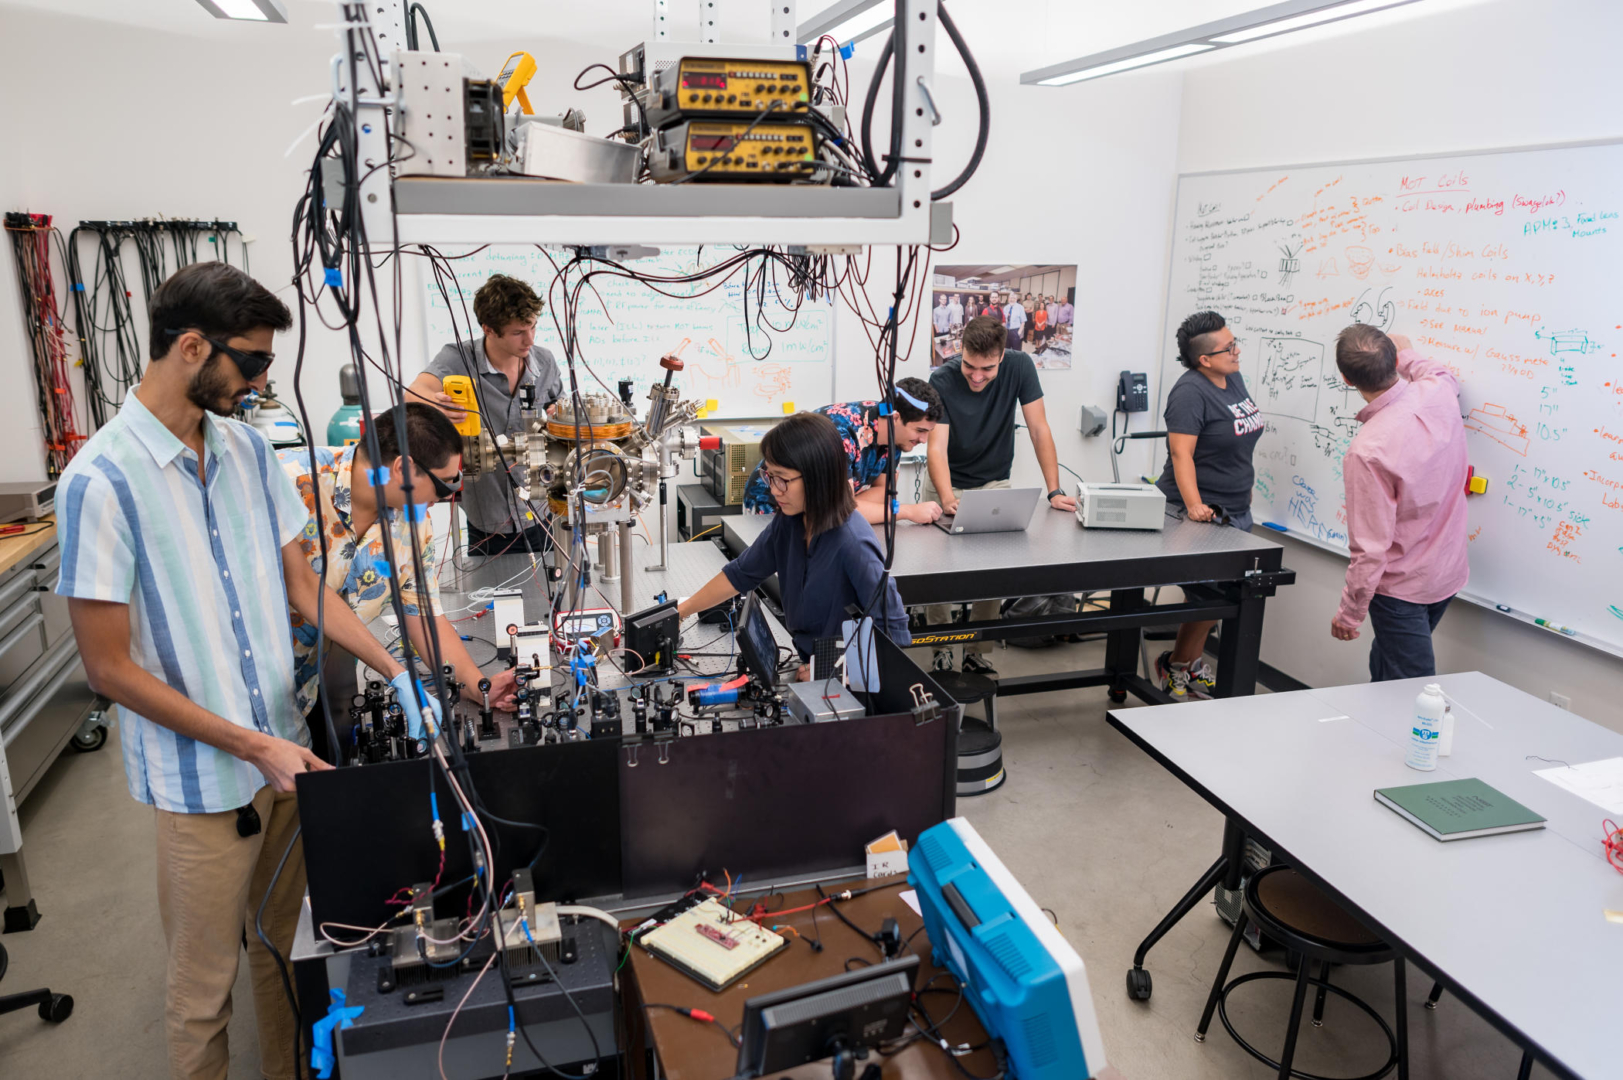 Students and faculty work the ultracold atom laboratory—some working on laptops, others looking at notes on a whiteboard, and others with the lasers and ultrahigh vacuum chamber.